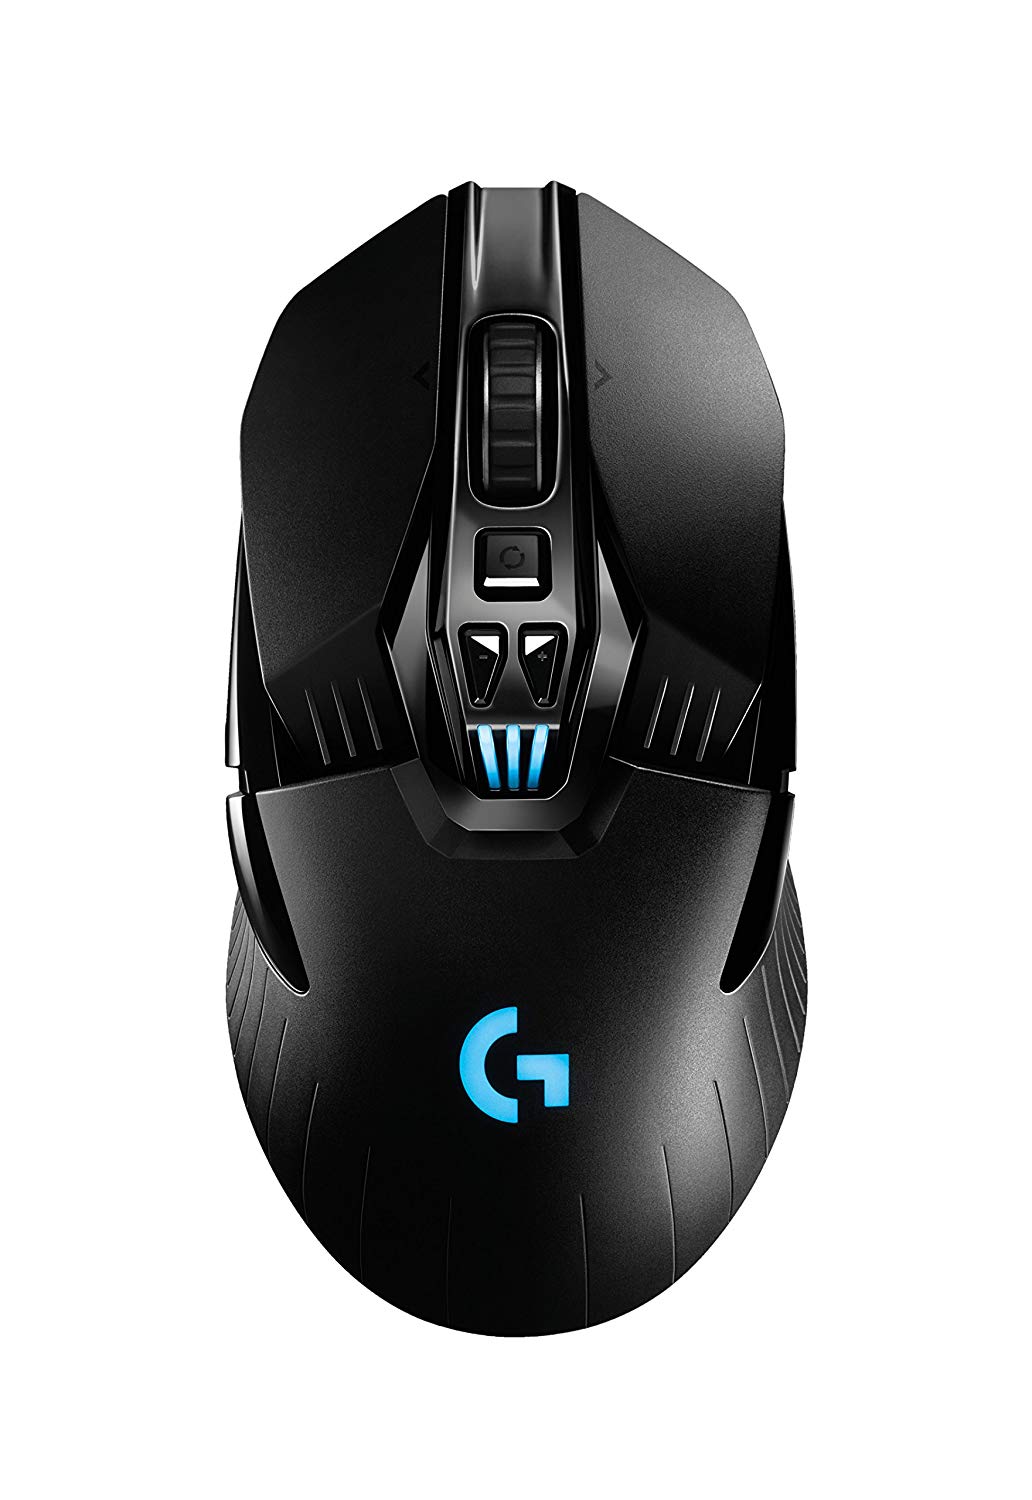 10 Best Gaming Mice (Mouse) Buyer's Guide (UPDATED)